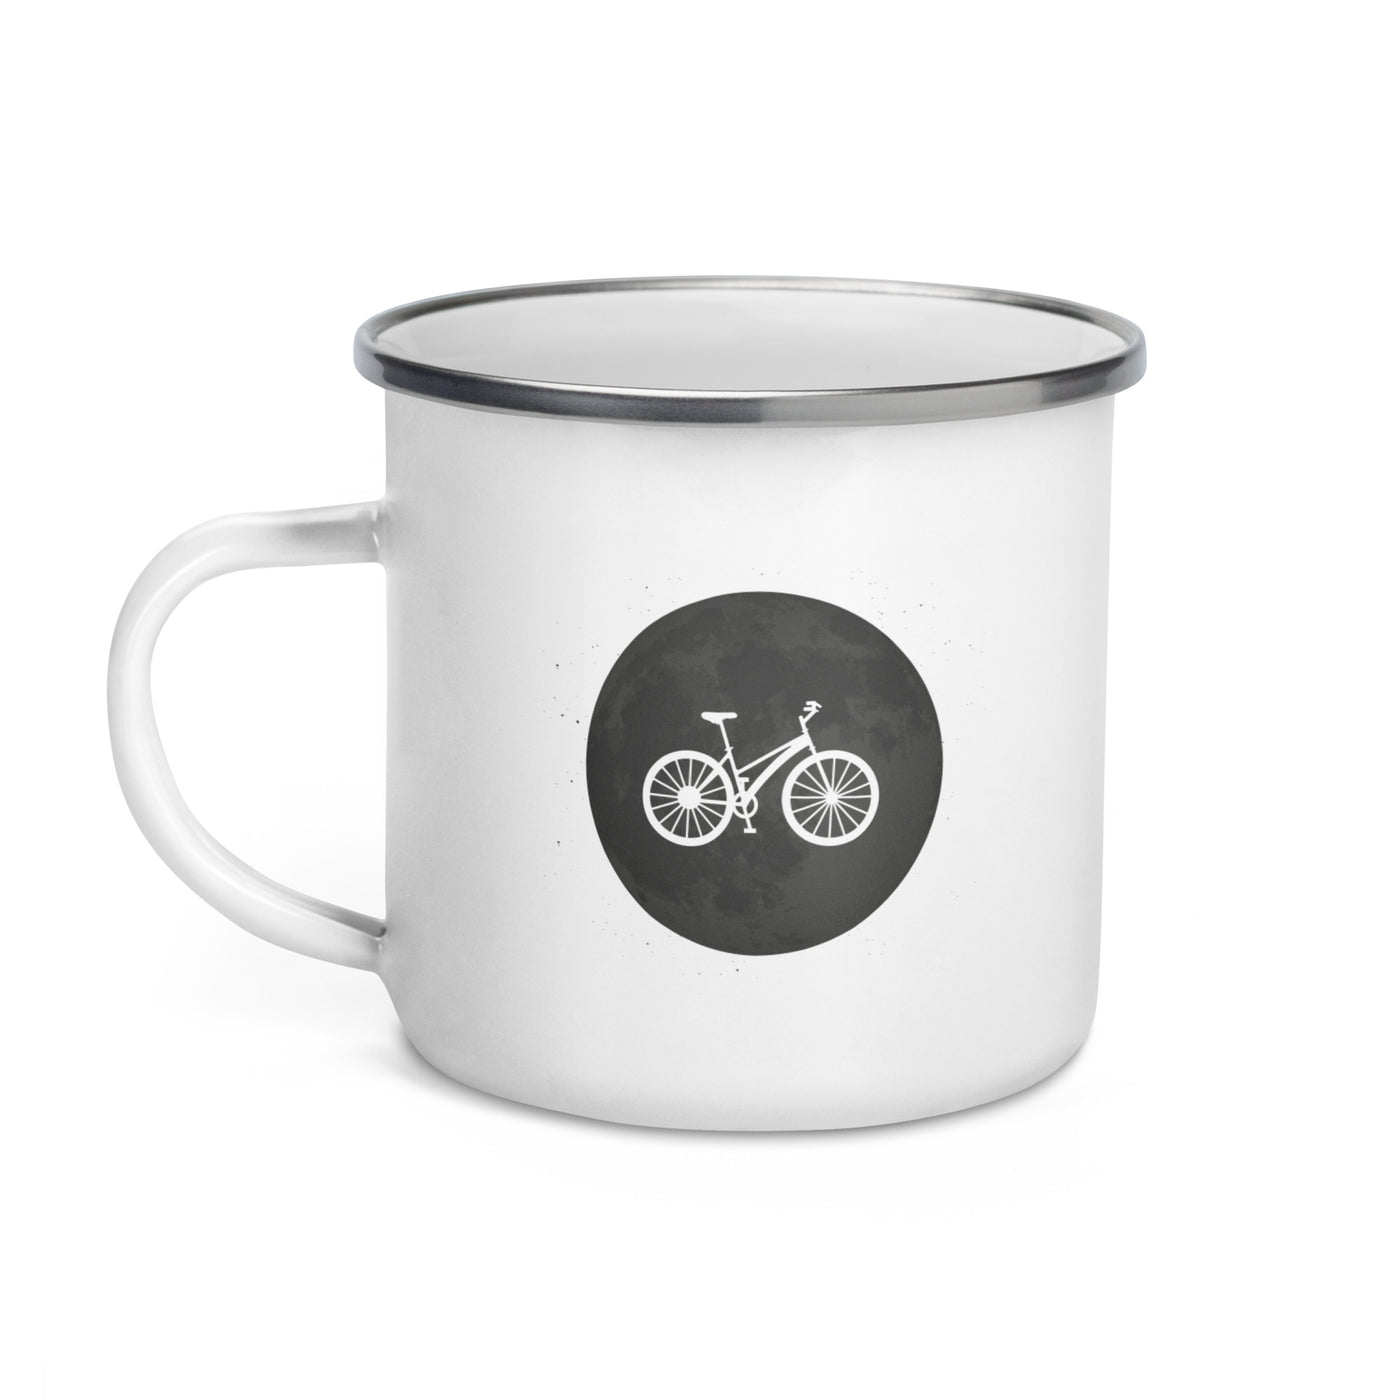 Full Moon - Cycling - Emaille Tasse fahrrad